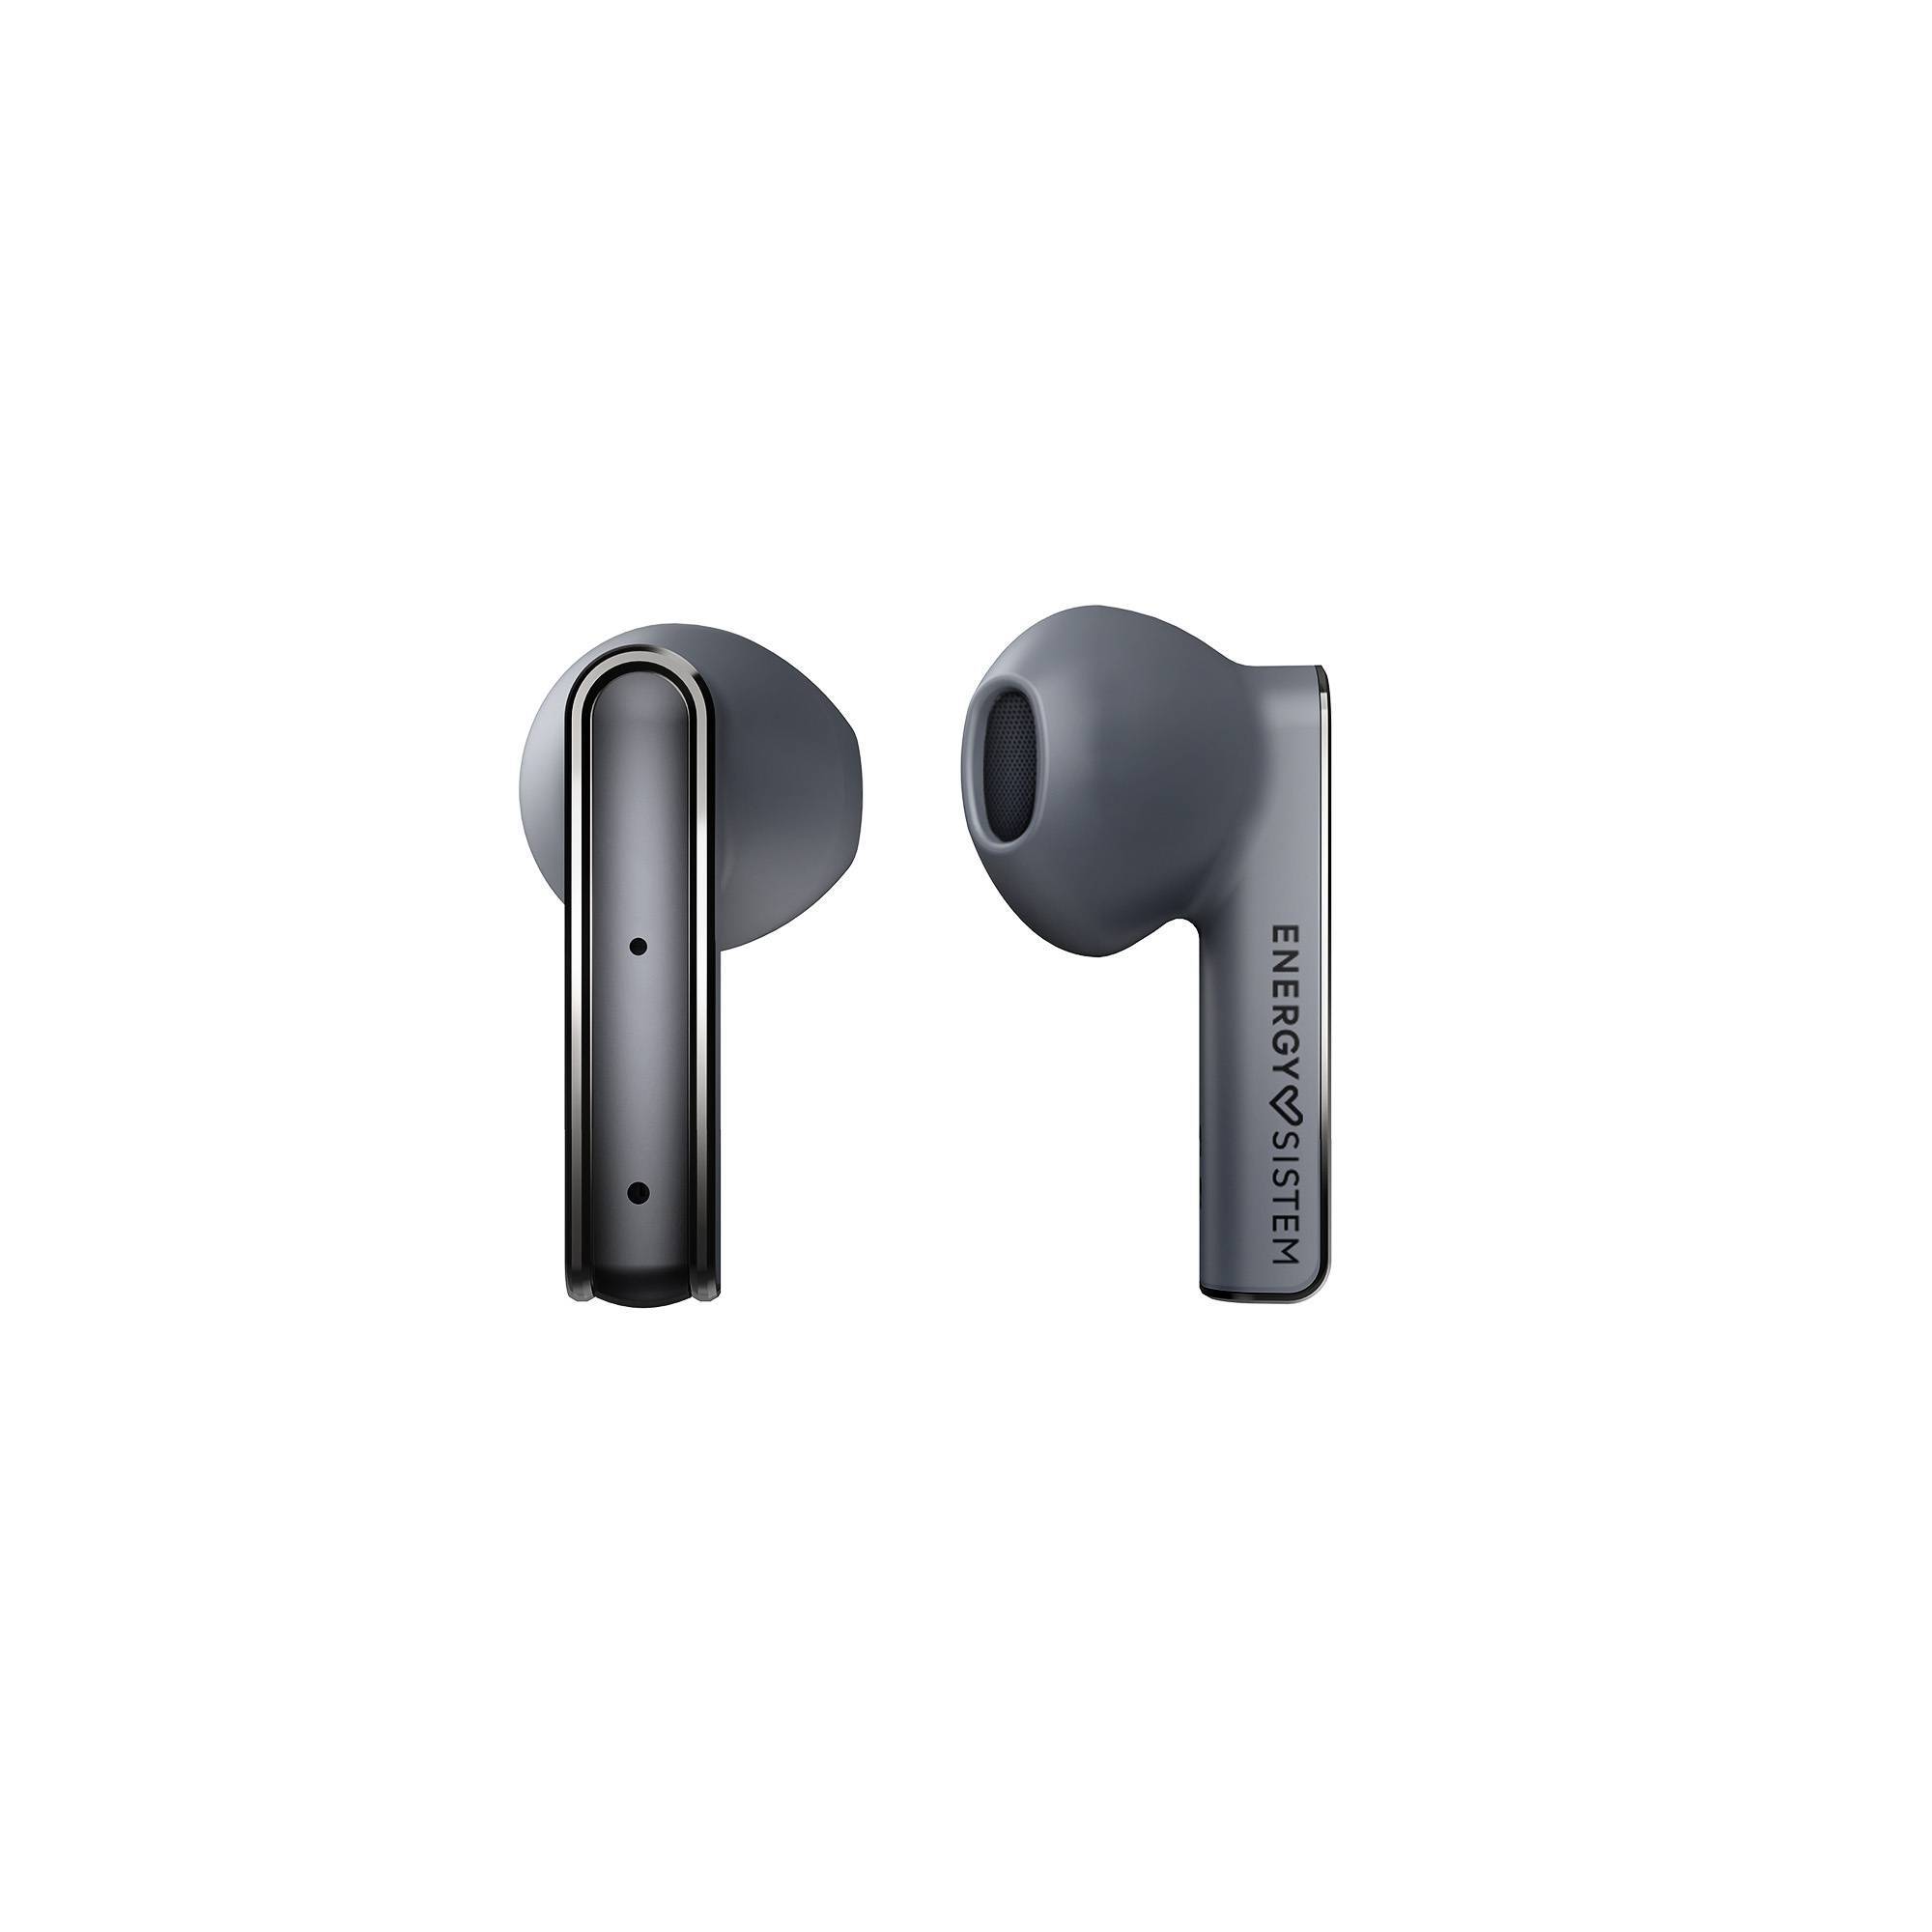 Wireless earphones offering up to 25 hours of battery life